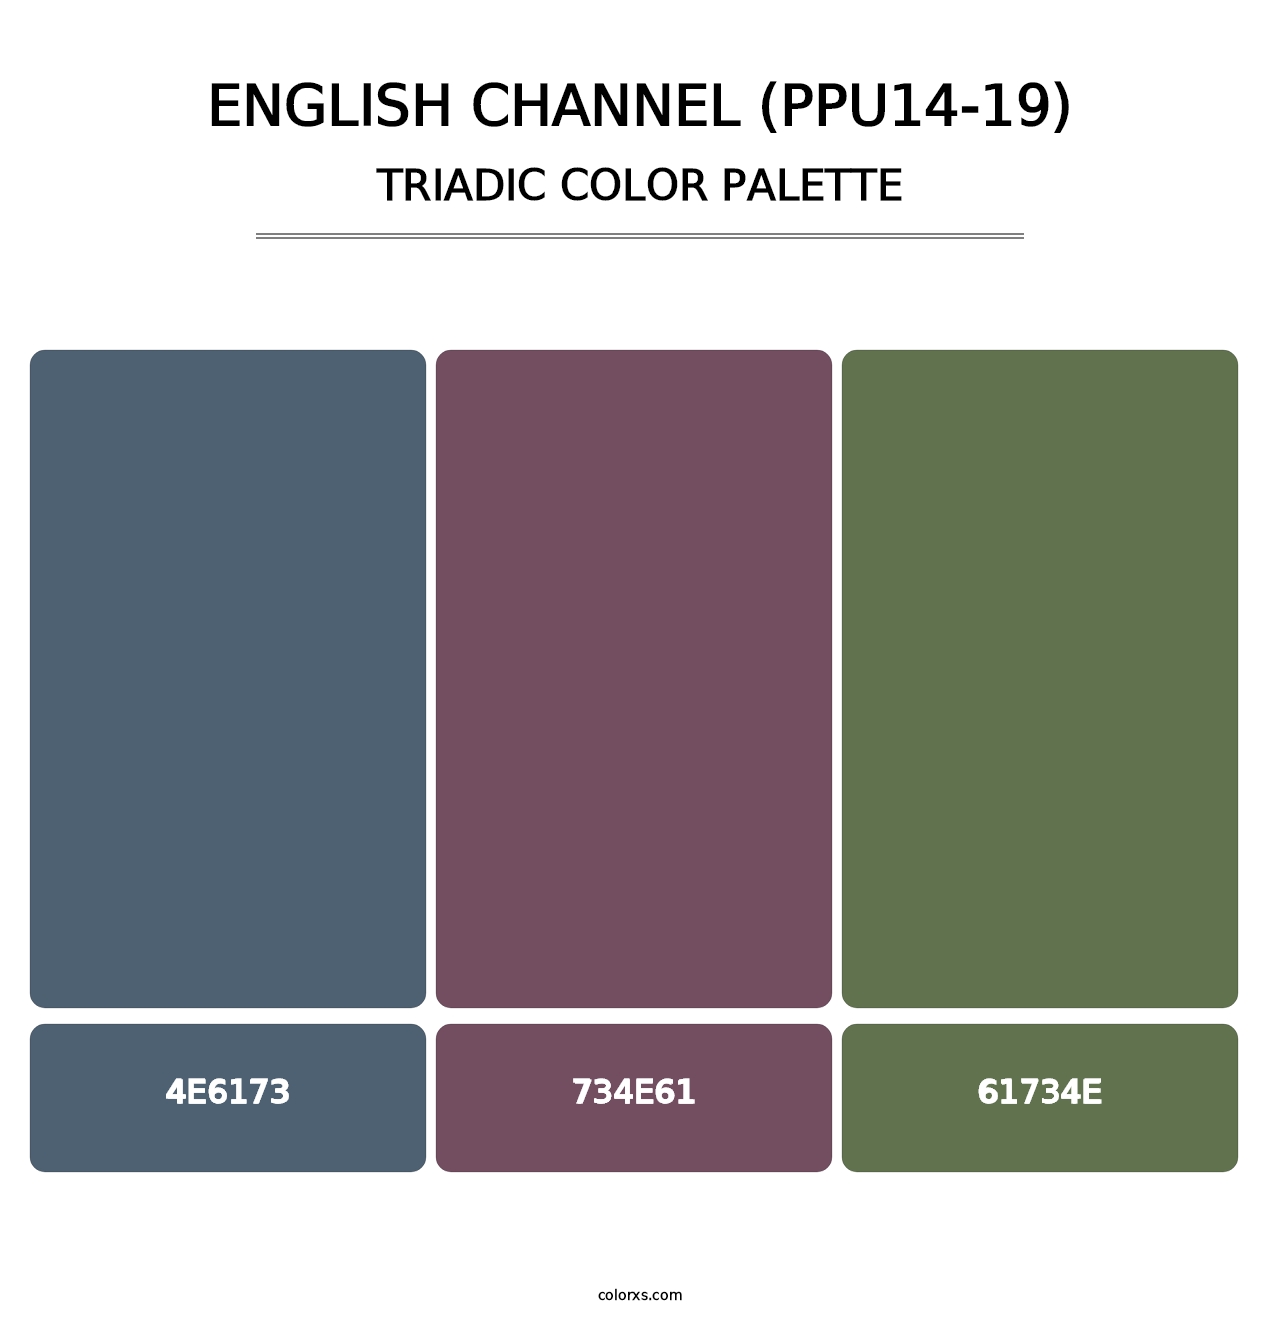 English Channel (PPU14-19) - Triadic Color Palette